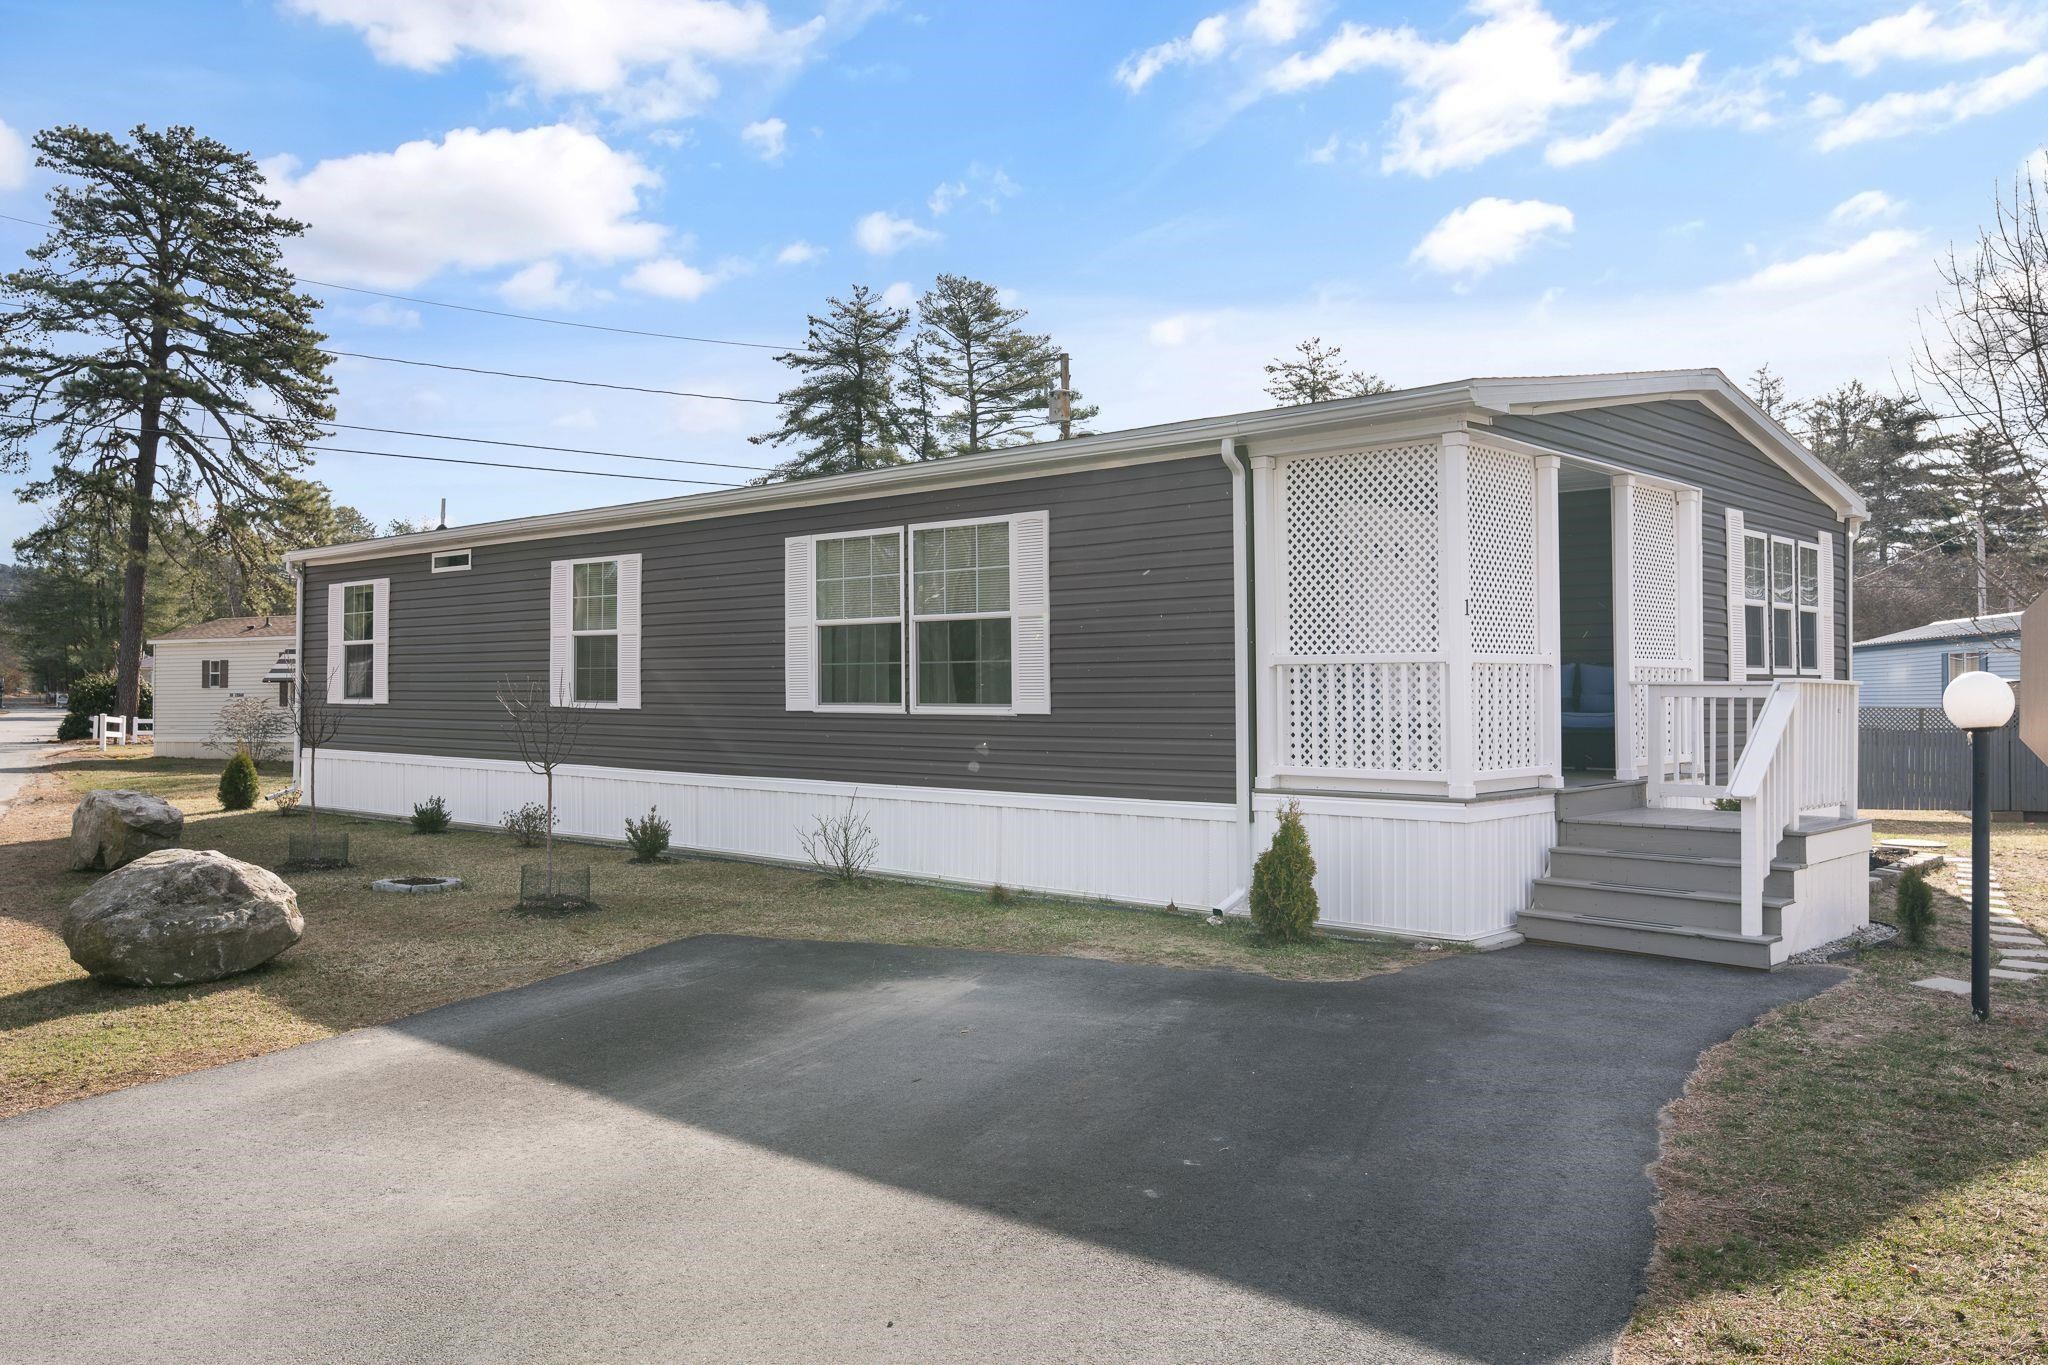 1 South Road, Hinsdale, NH 03451